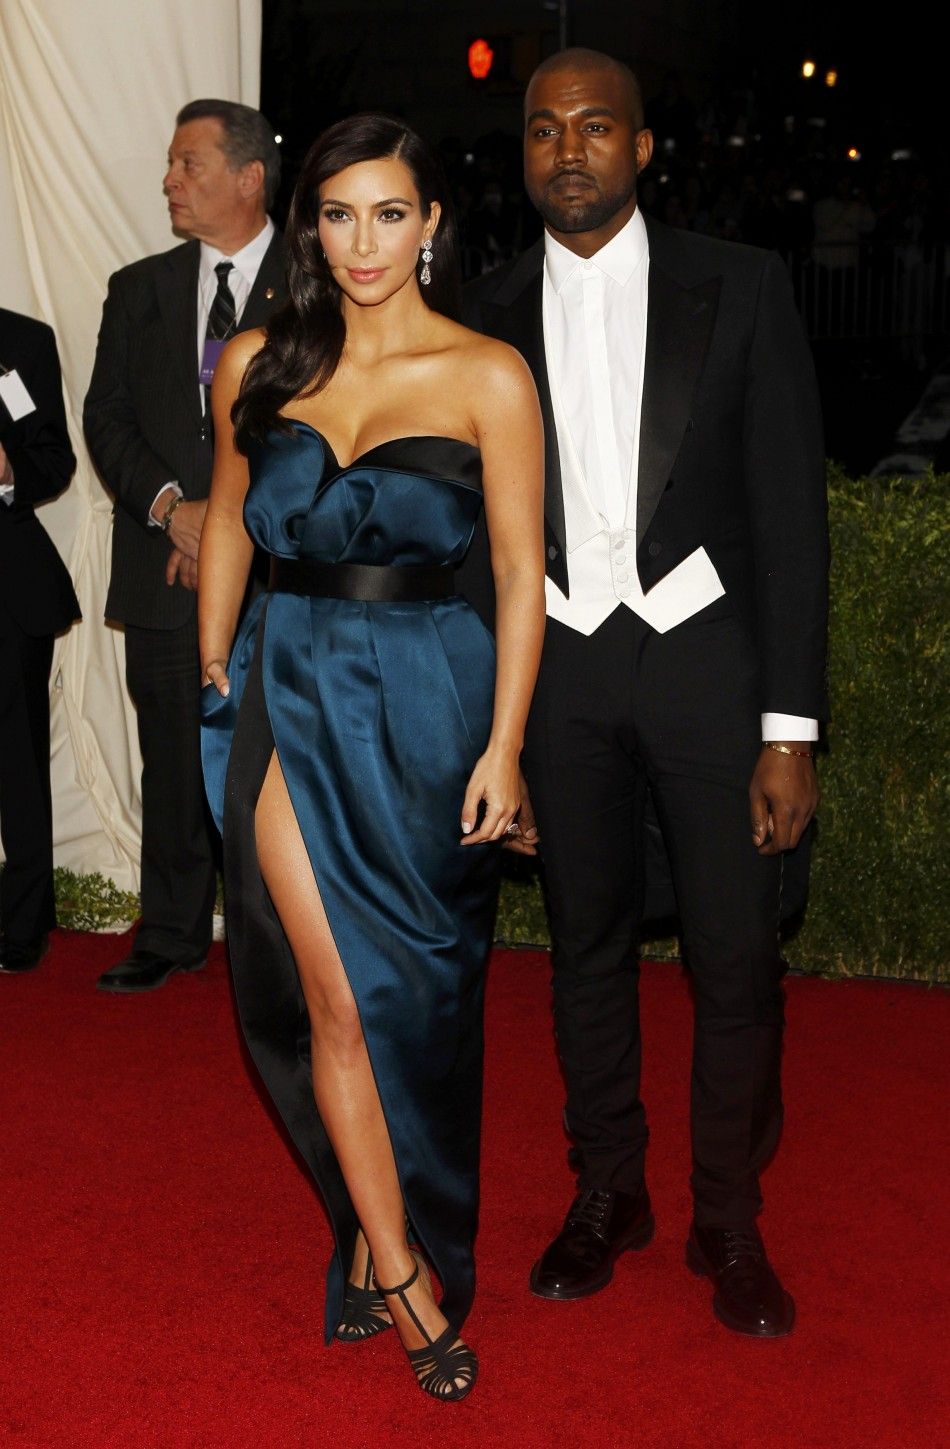 Kim Kashdashian and Kanye West arrive at the Metropolitan Museum of Art Costume Institute Gala Benefit celebrating the opening of quotCharles James Beyond Fashionquot in Upper Manhattan, New York May 5, 2014. REUTERSCarlo Allegri  